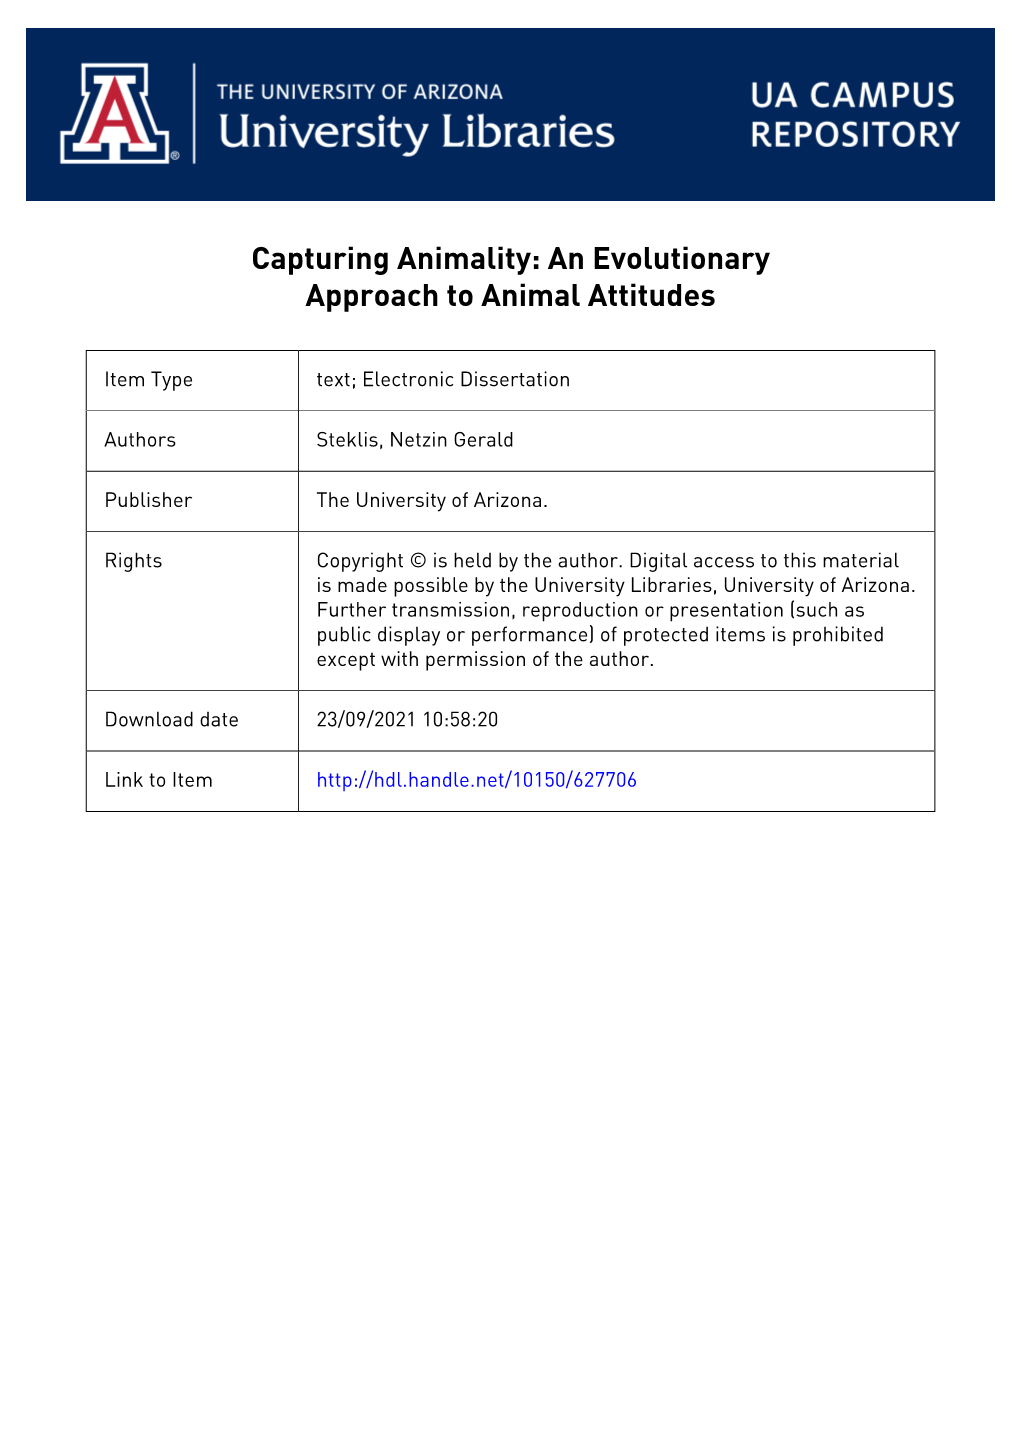 Capturing Animality: an Evolutionary Approach to Animal Attitudes